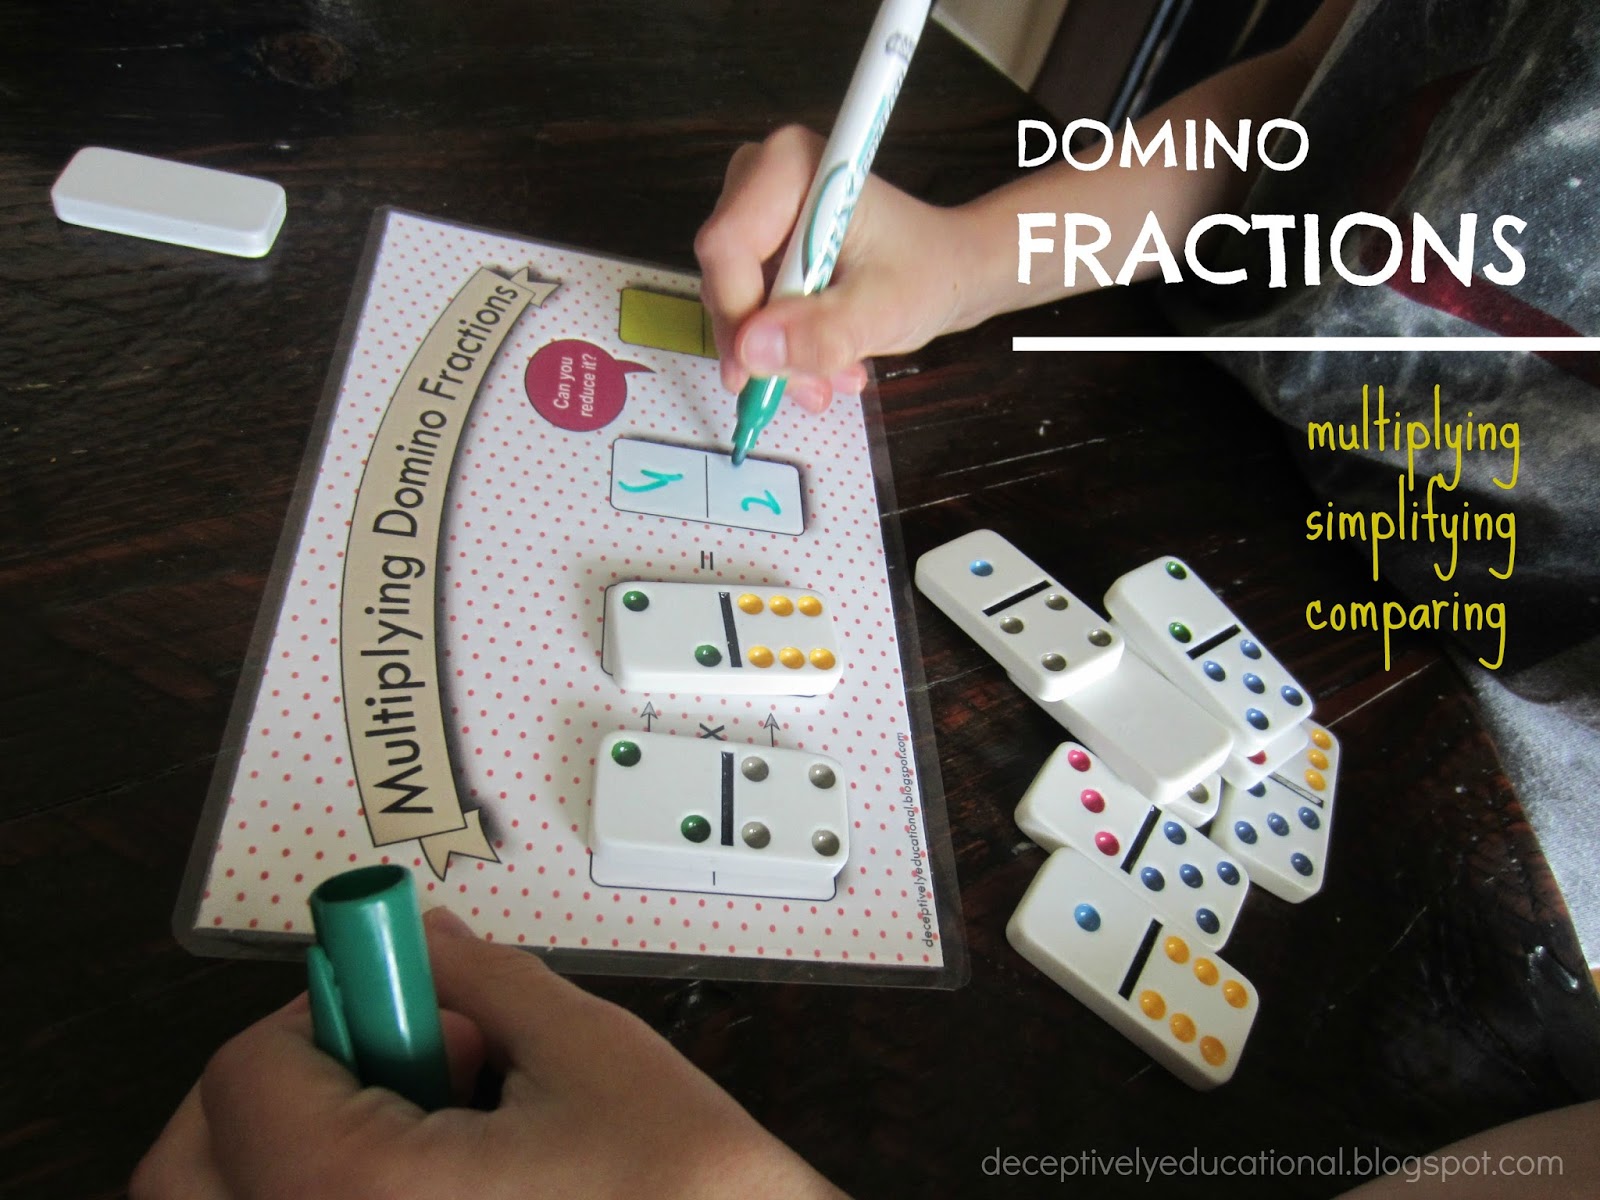 Railway station biography candidate Relentlessly Fun, Deceptively Educational: Multiplying Domino Fractions